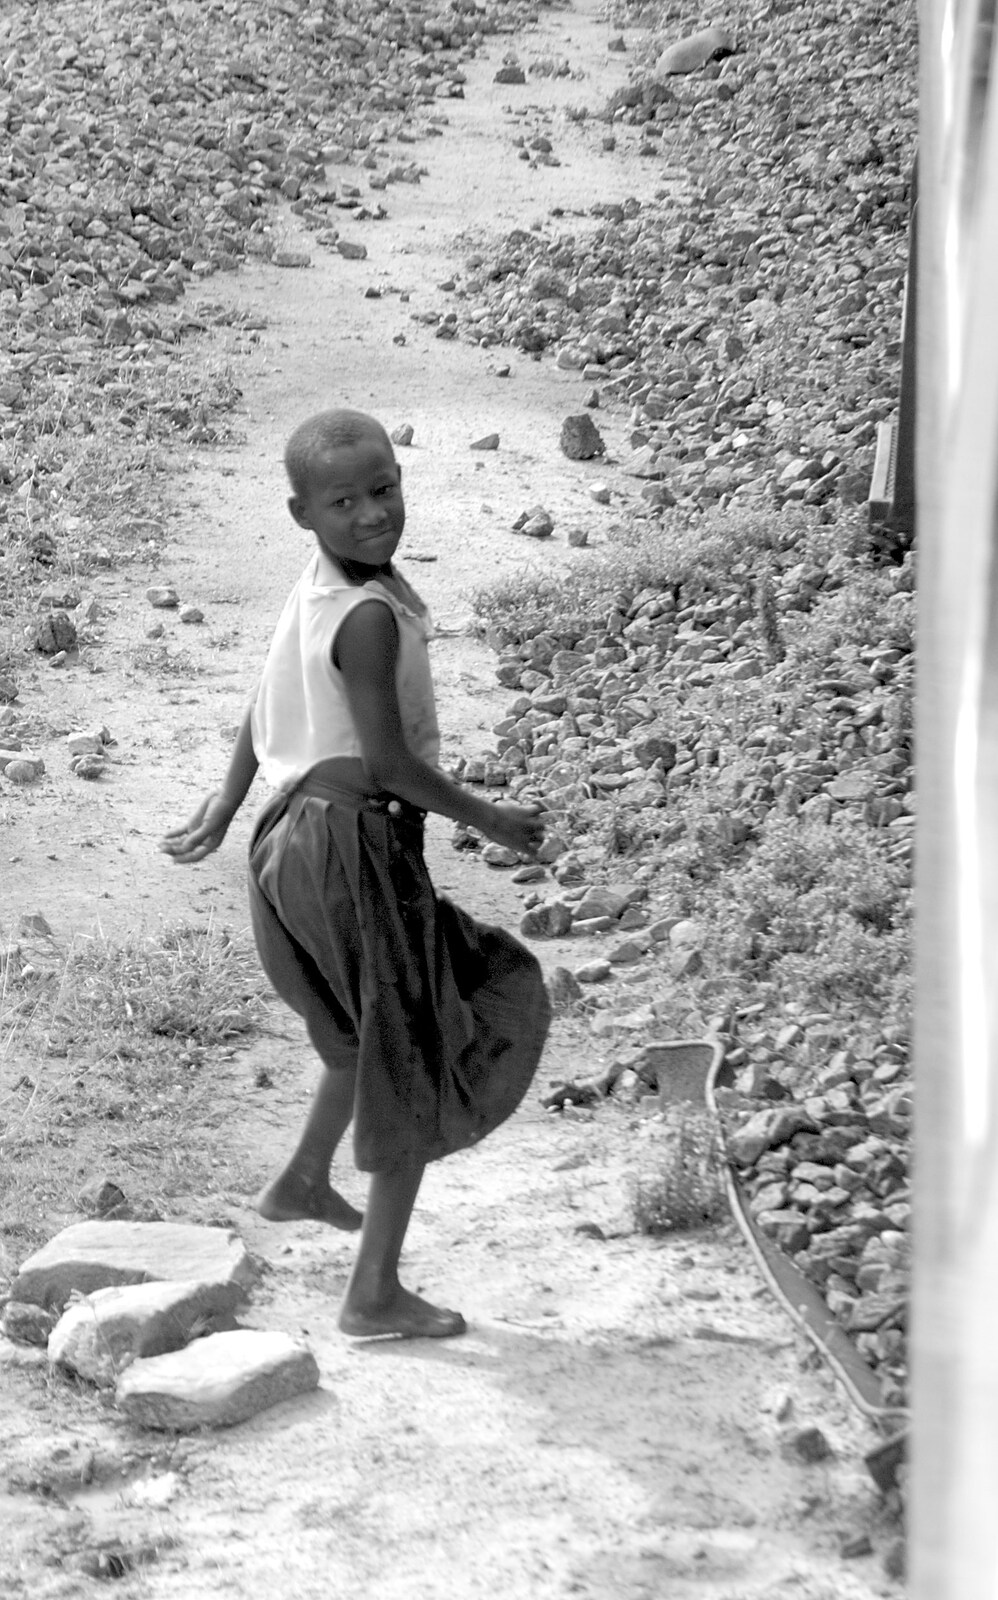 Another small boy chases the train from Long Train (not) Runnin': Tiwi Beach, Mombasa, Kenya - 7th November 2010